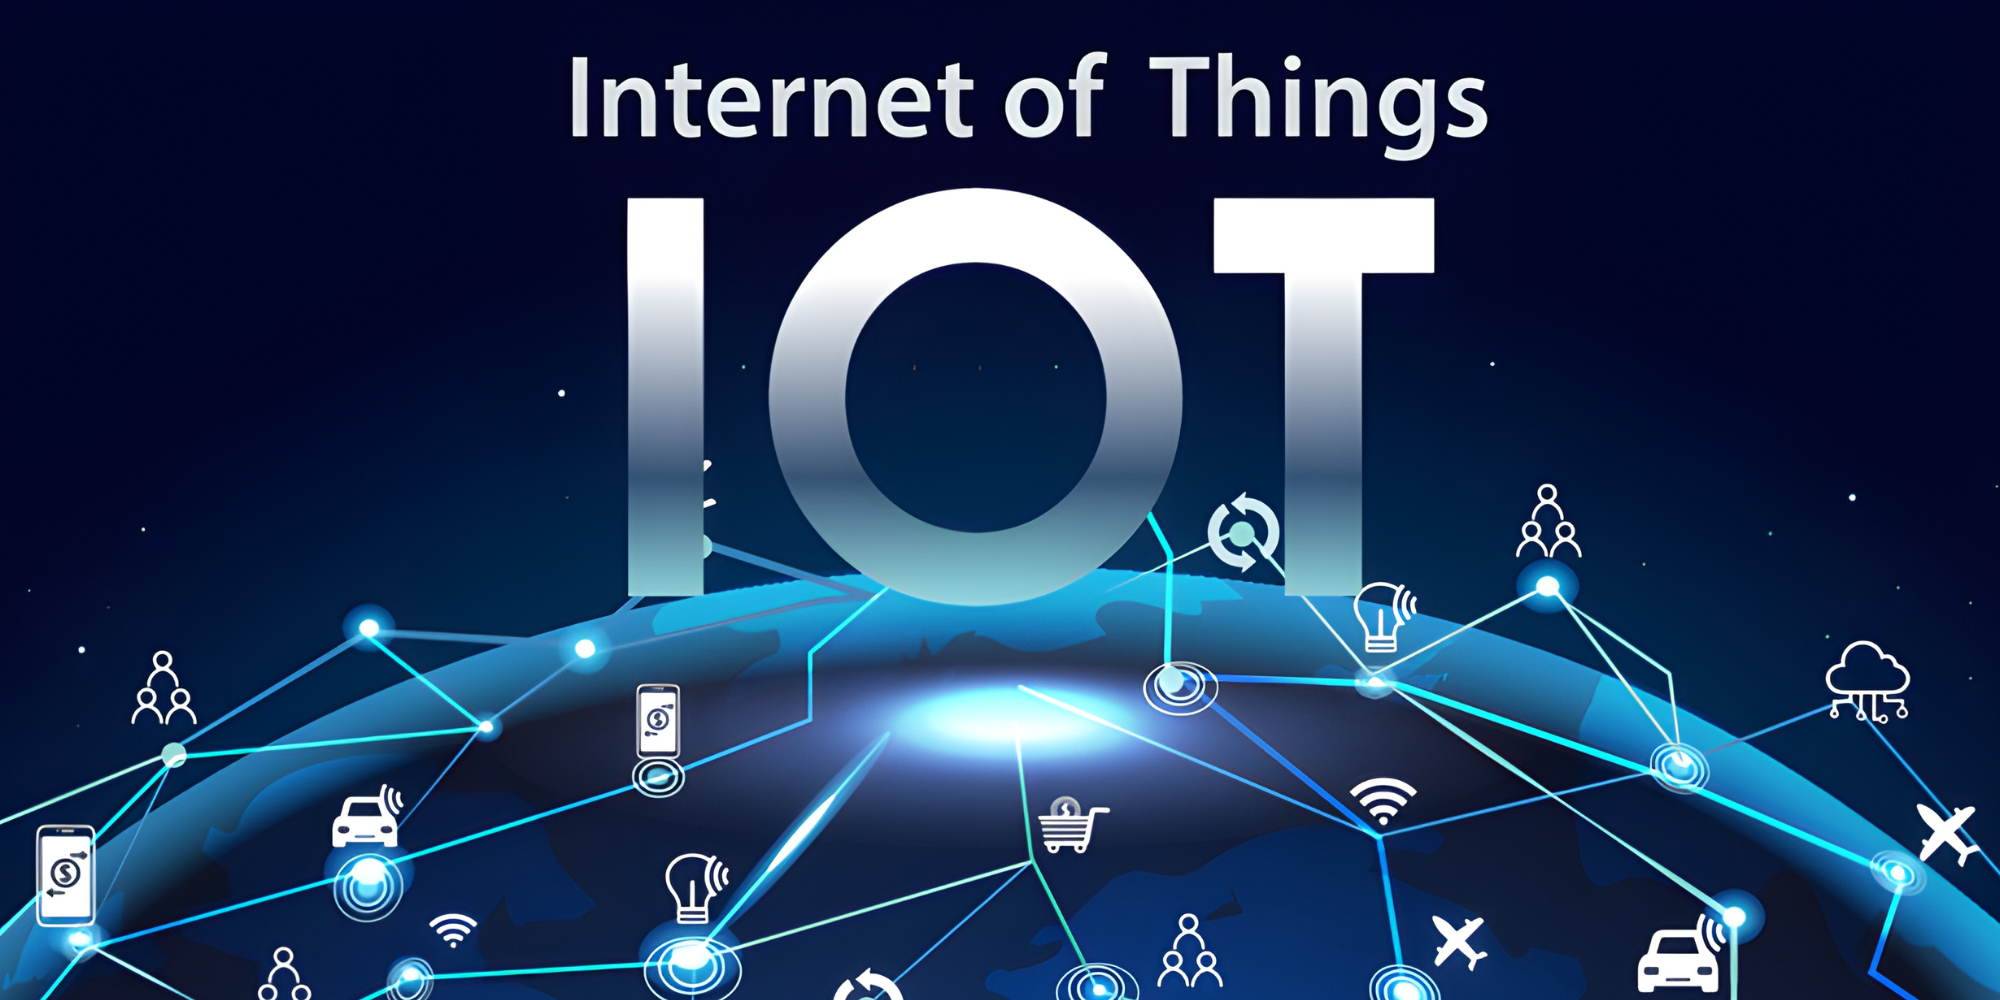 Edge-driven IoT: How it is fueling the next wave of digital transformation